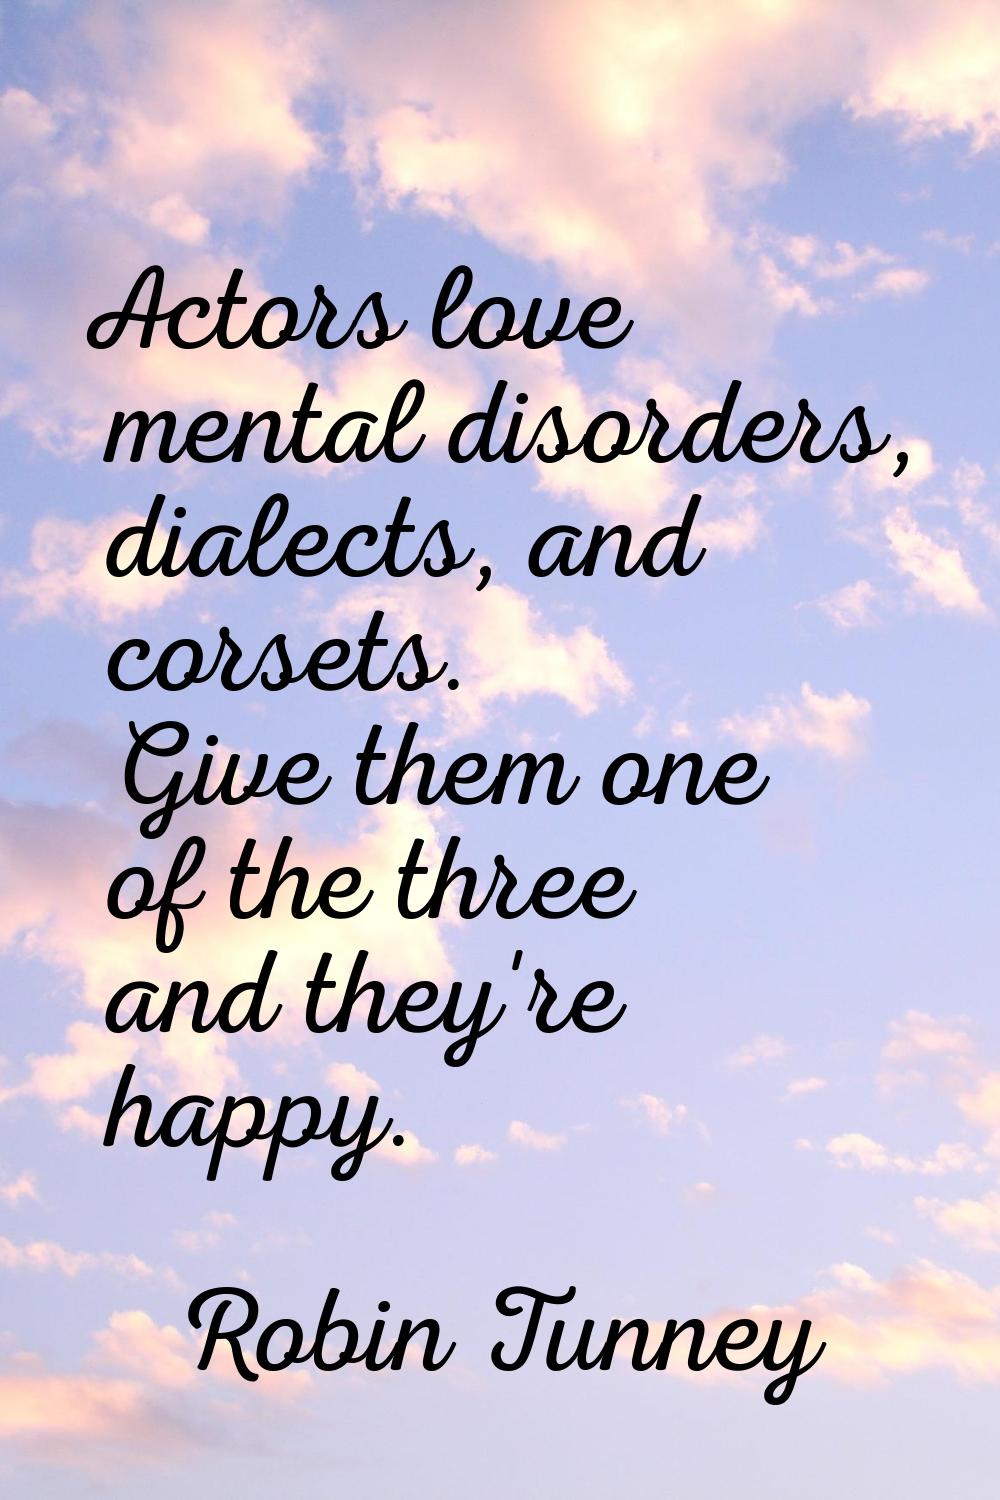 Actors love mental disorders, dialects, and corsets. Give them one of the three and they're happy.